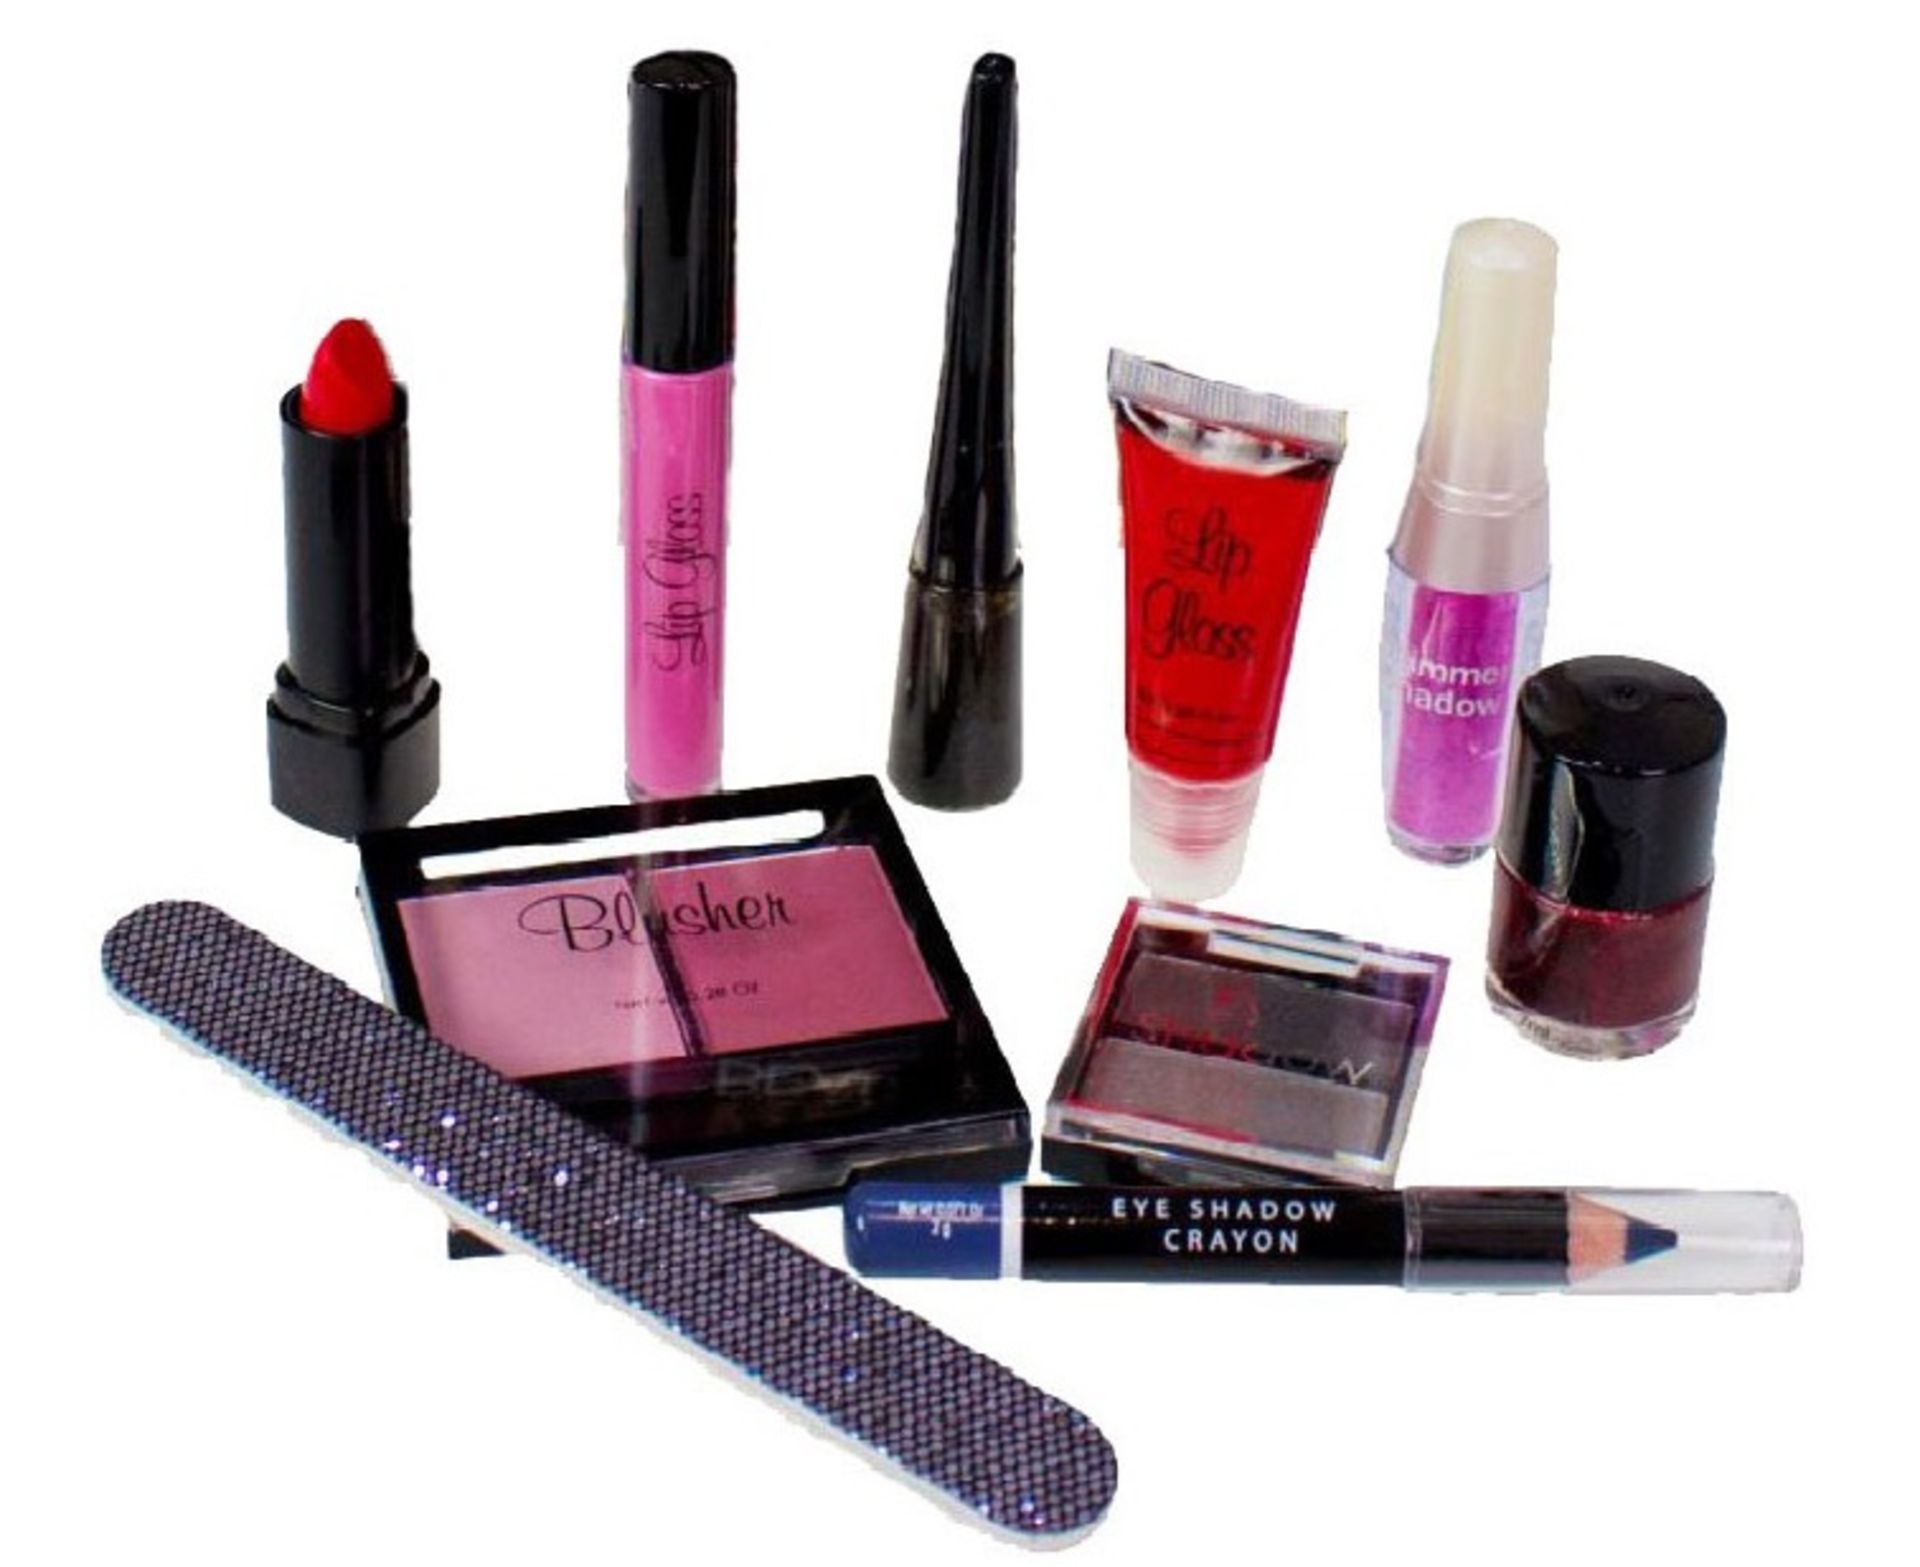 V *TRADE QTY* Brand New Ten Beauty Product Selection in Gift Bag (Contents vary) X 20 YOUR BID PRICE